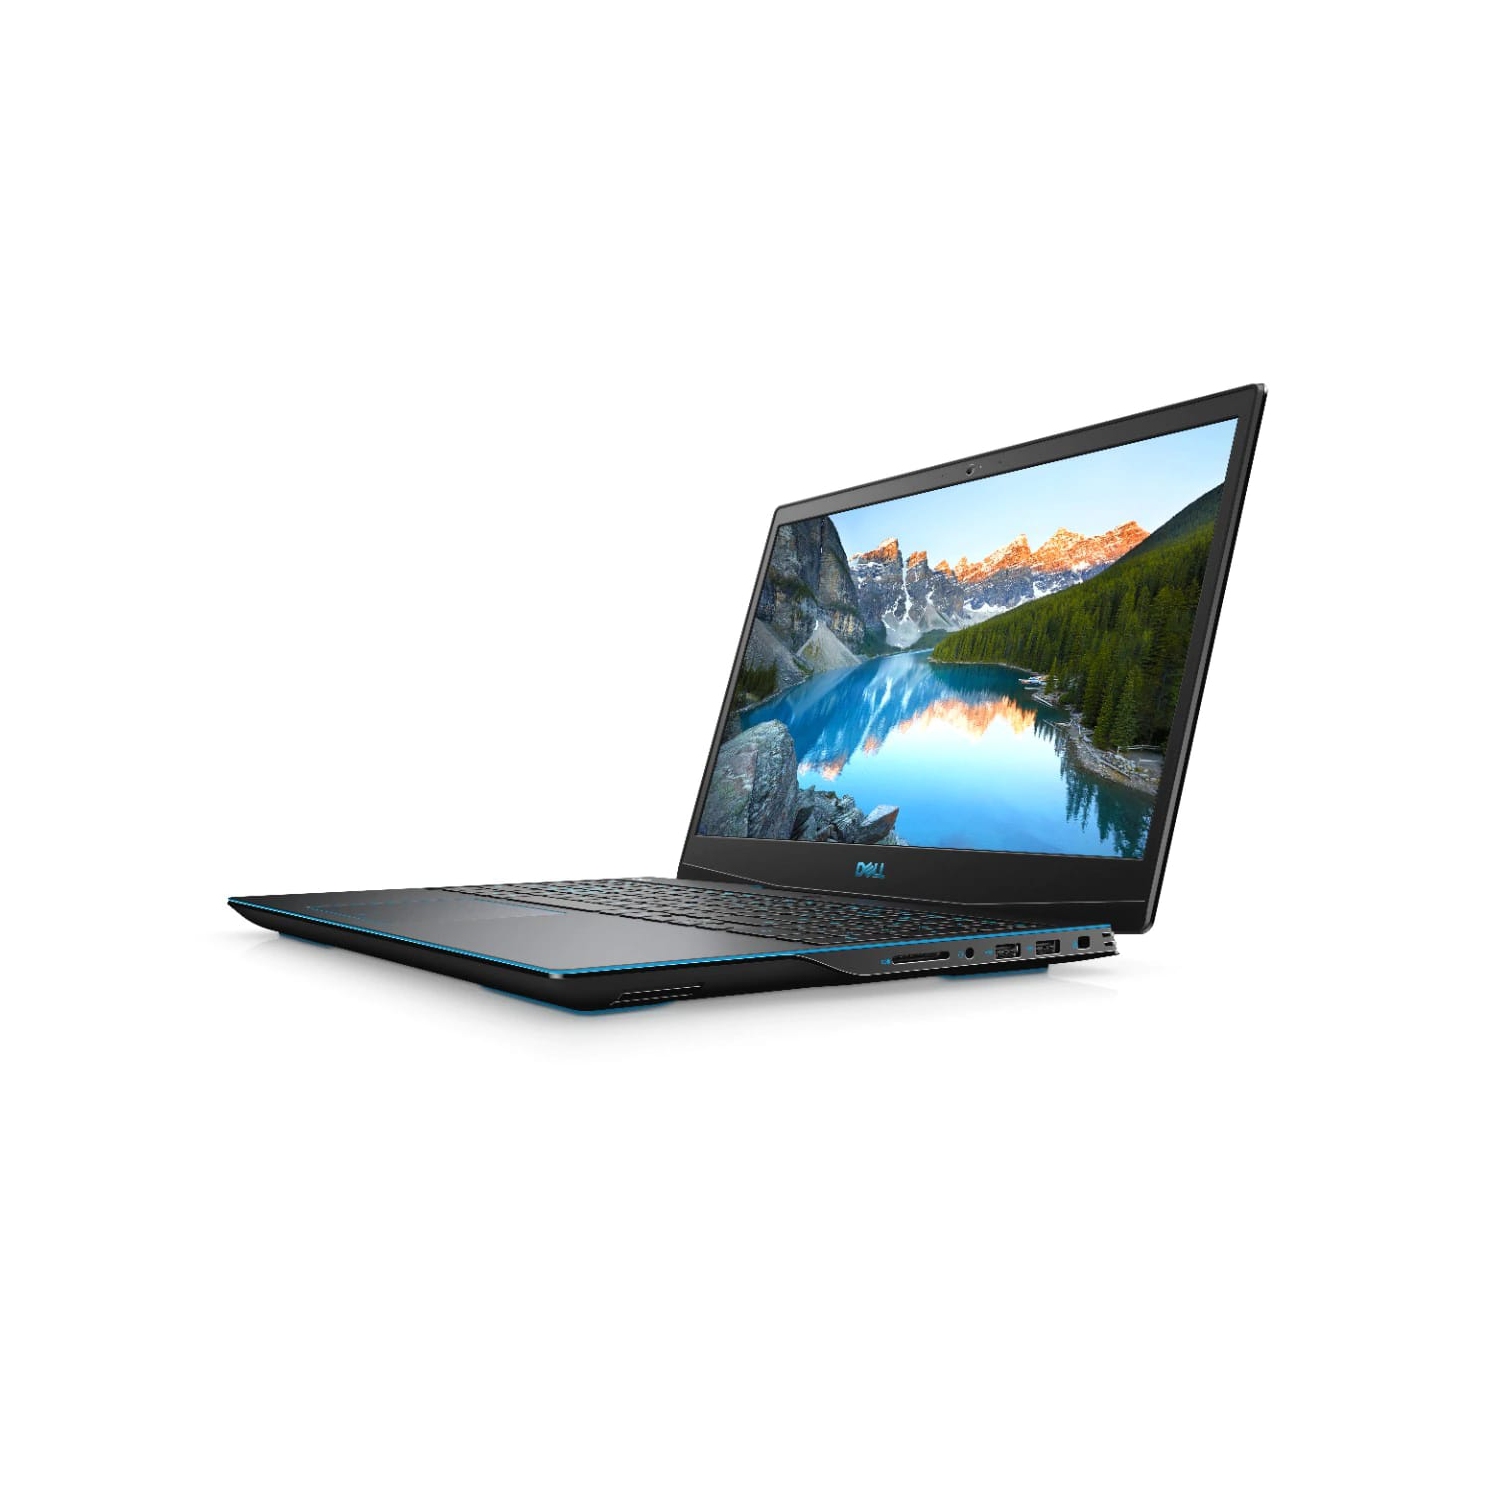 Refurbished (Excellent) – Dell G3 3500 Gaming Laptop (2020) | 15.6" FHD | Core i7 - 512GB SSD - 16GB RAM | 6 Cores @ 5 GHz - 10th Gen CPU